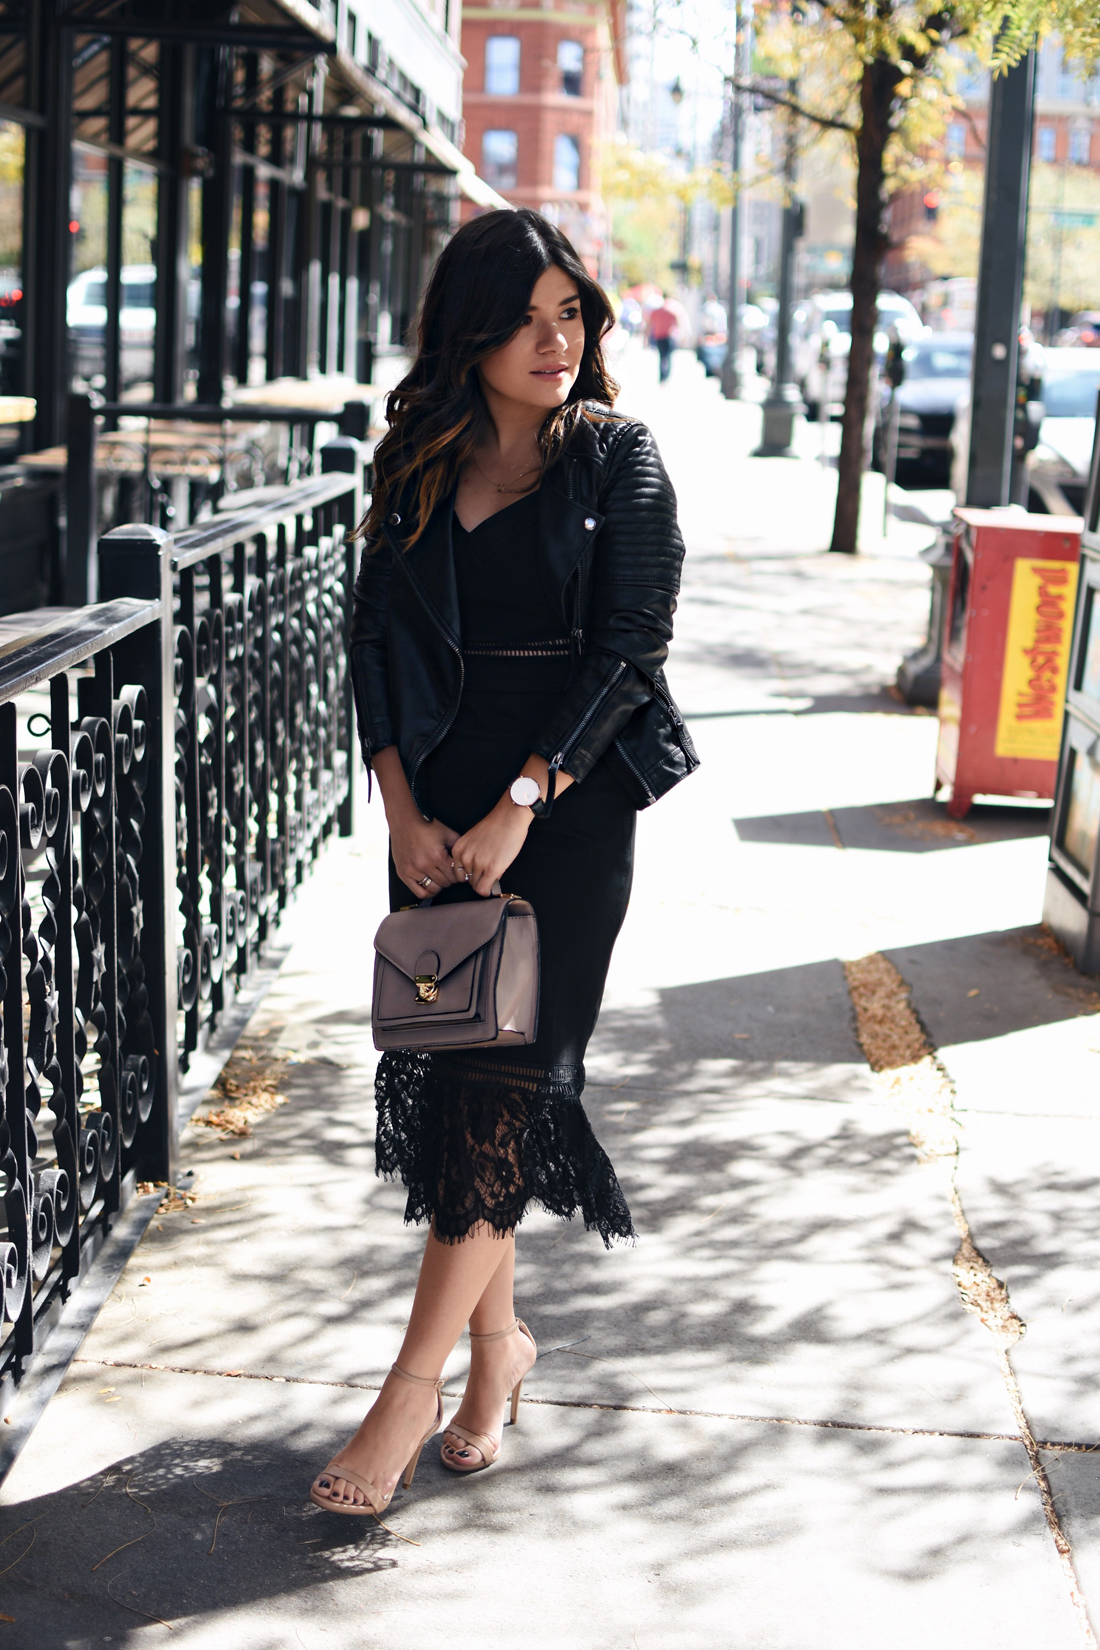 Carolina Hellal of Chic Talk wearing a Chicwish black lace dress, Topshop faux leather jacket, Mellow World bag and Steve Madden nude sandals